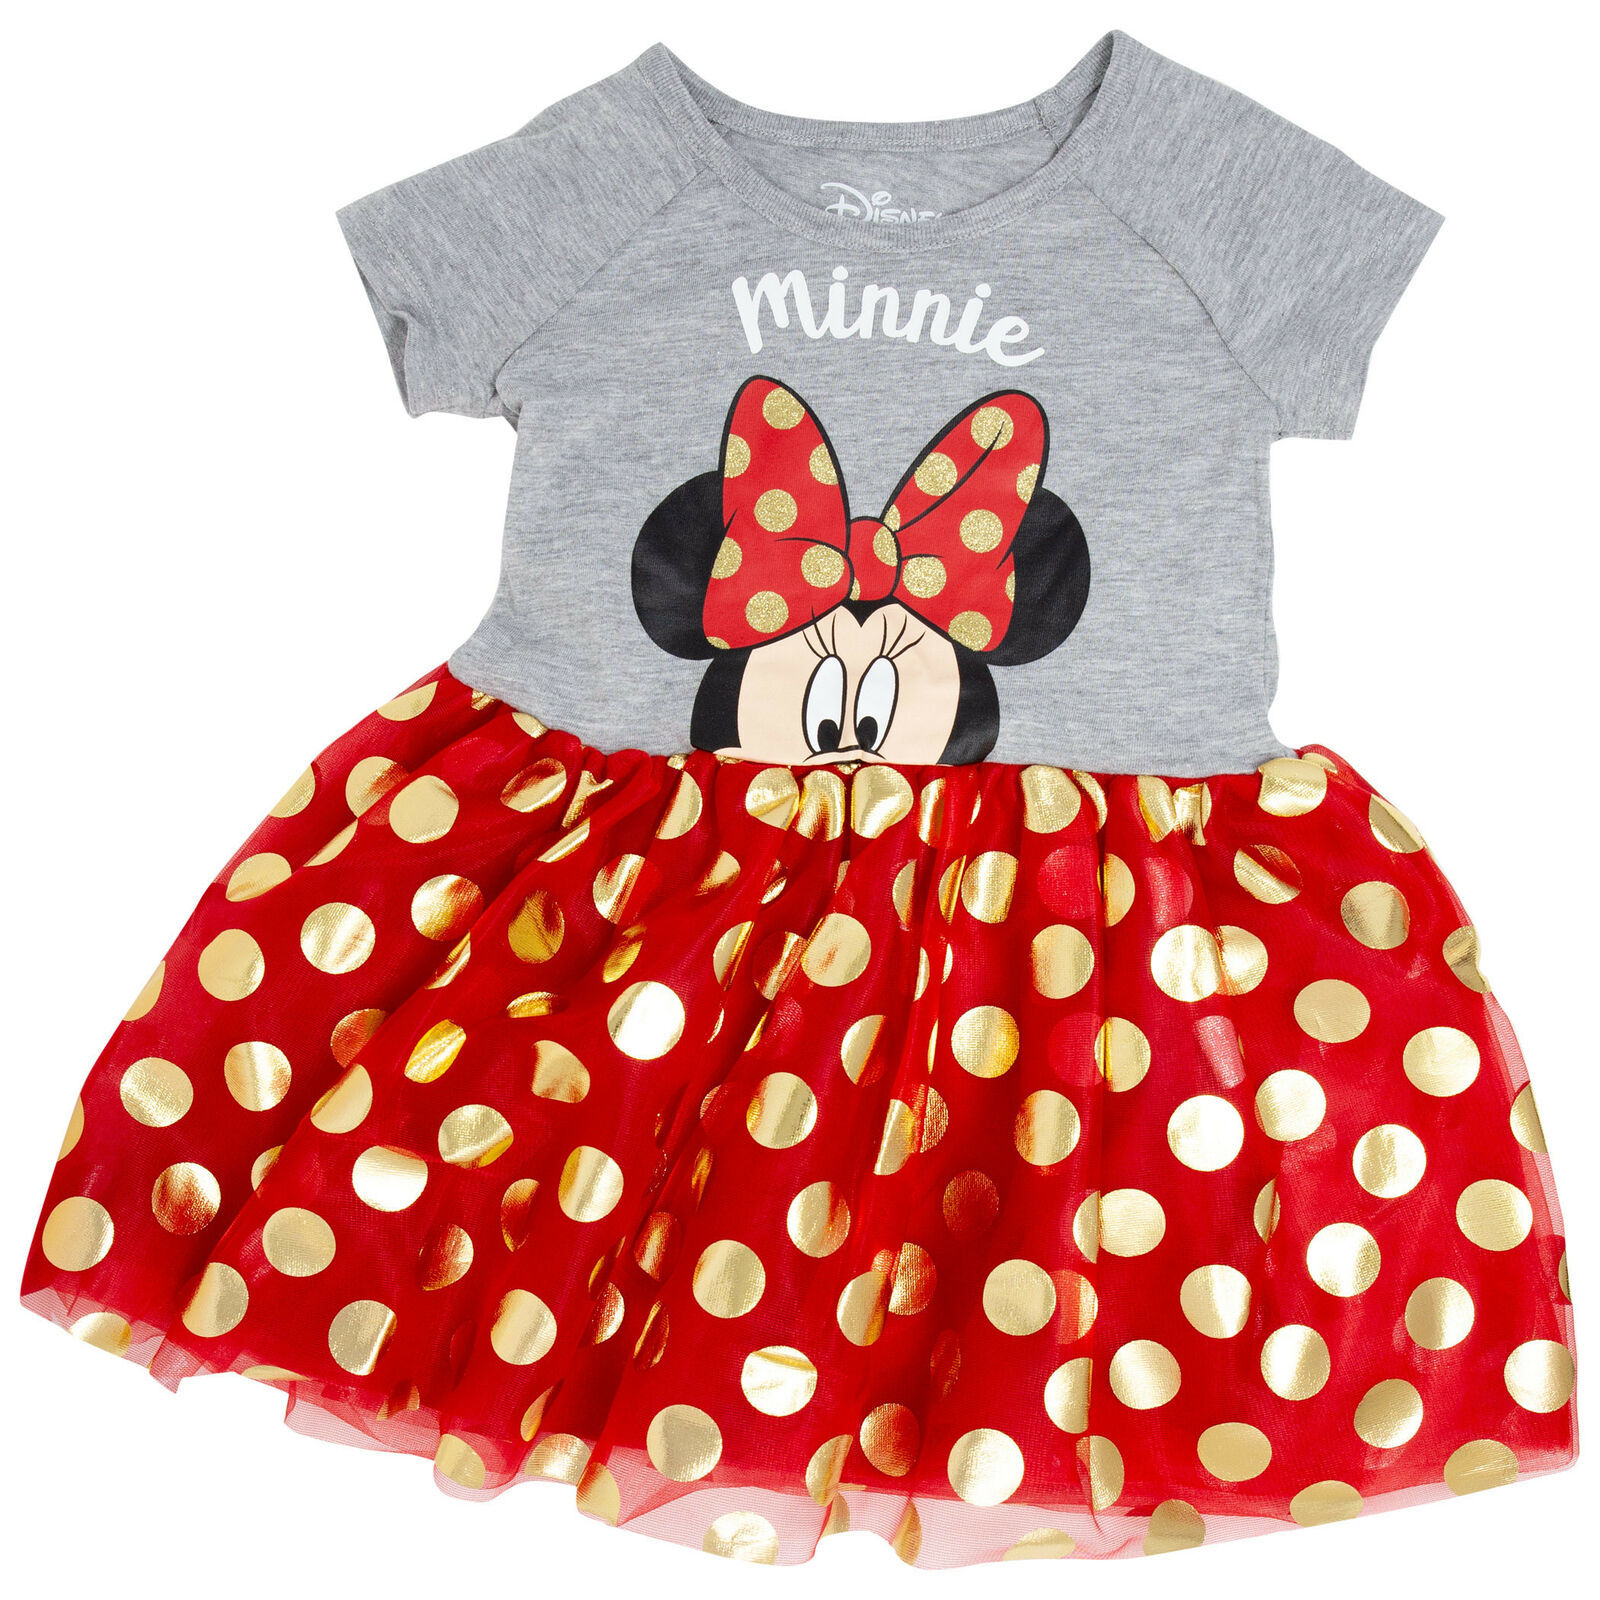 Minnie Mouse Bow Toddlers Dress Red - $31.98